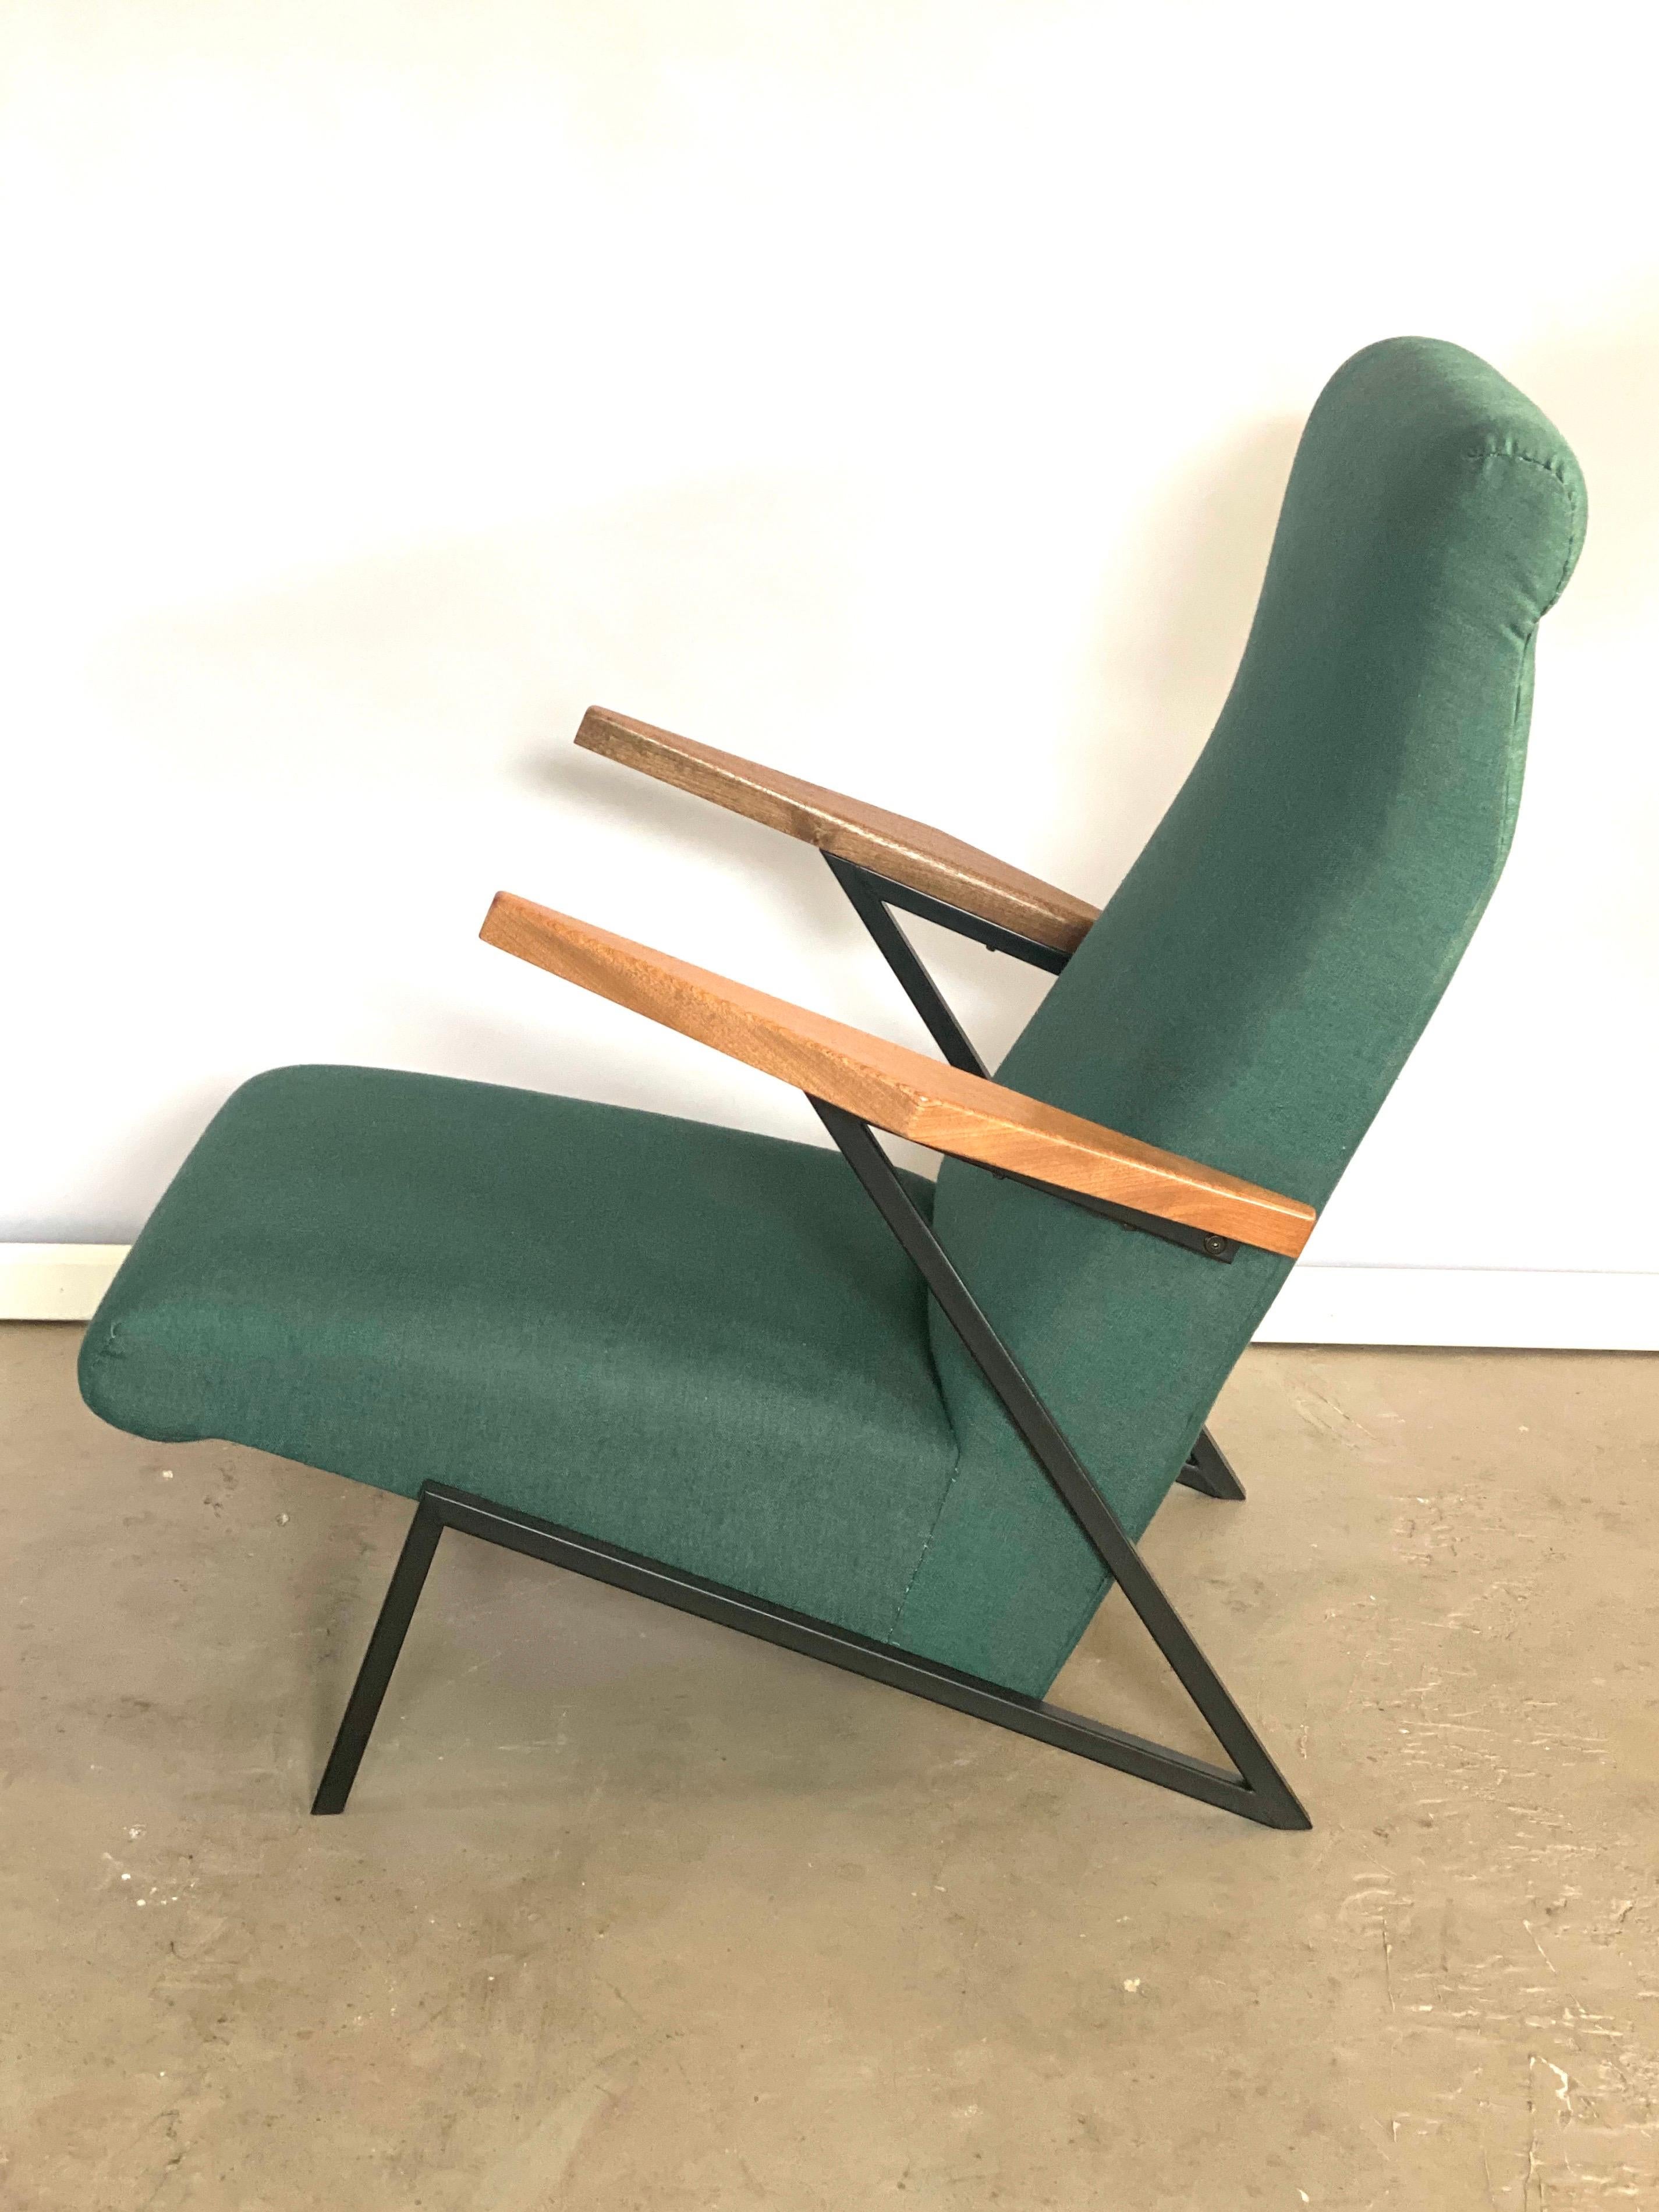 Beautiful and very rare lounge or easy chair by Pierre Guariche, newly upholstered, powder coated, sanded and lacquered according to the original state. The upholstery is the finest quality 100% wool. This model with the armrests is extremely rare,